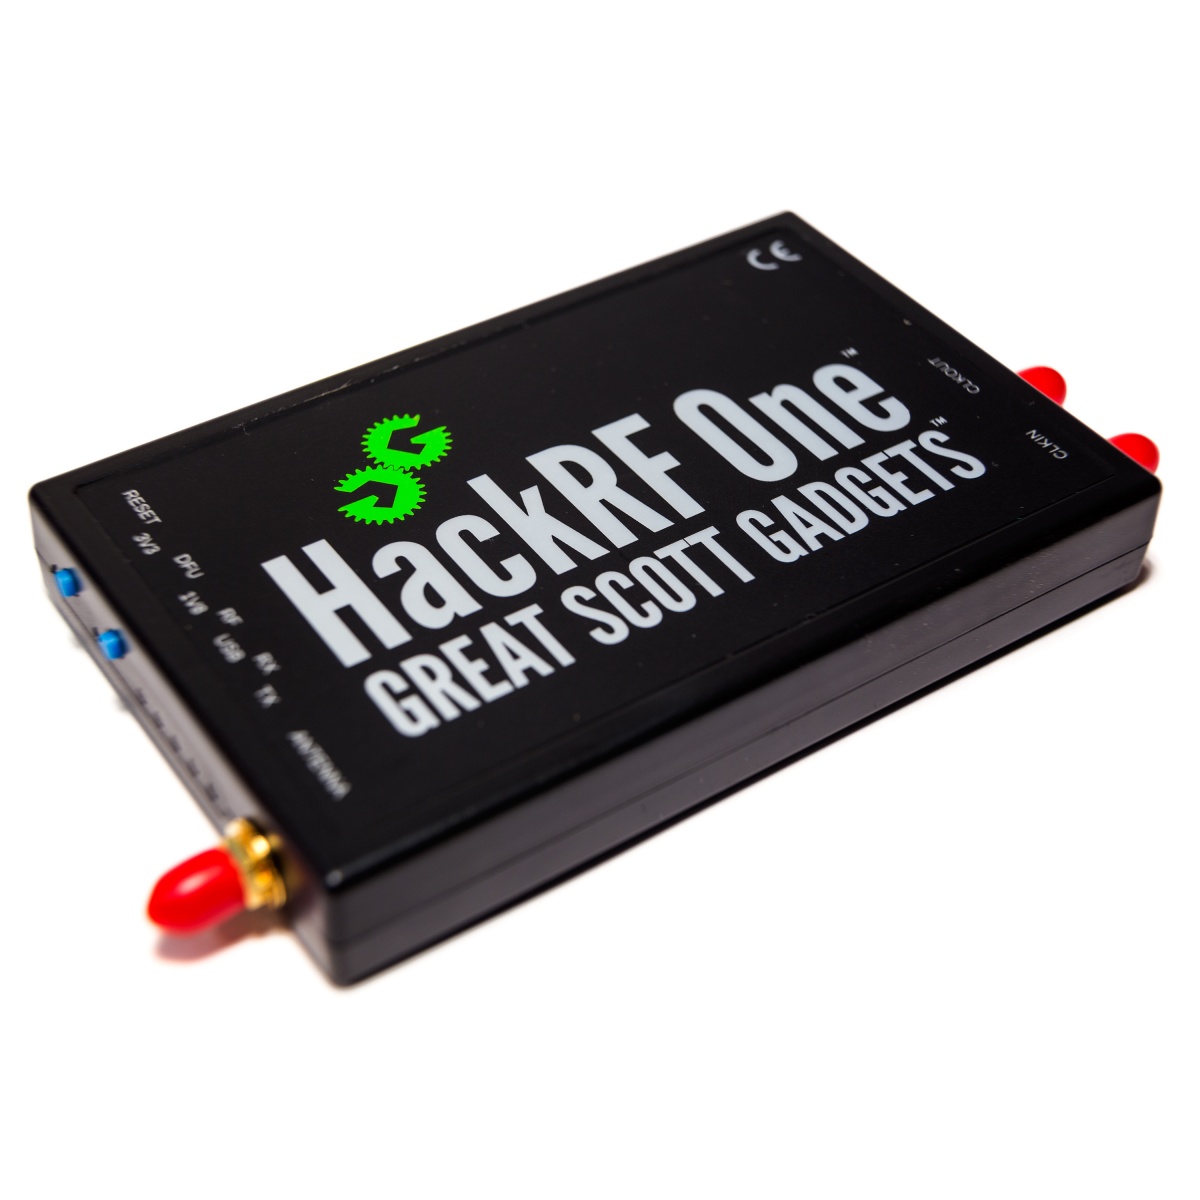 Software defined radio receiver kit